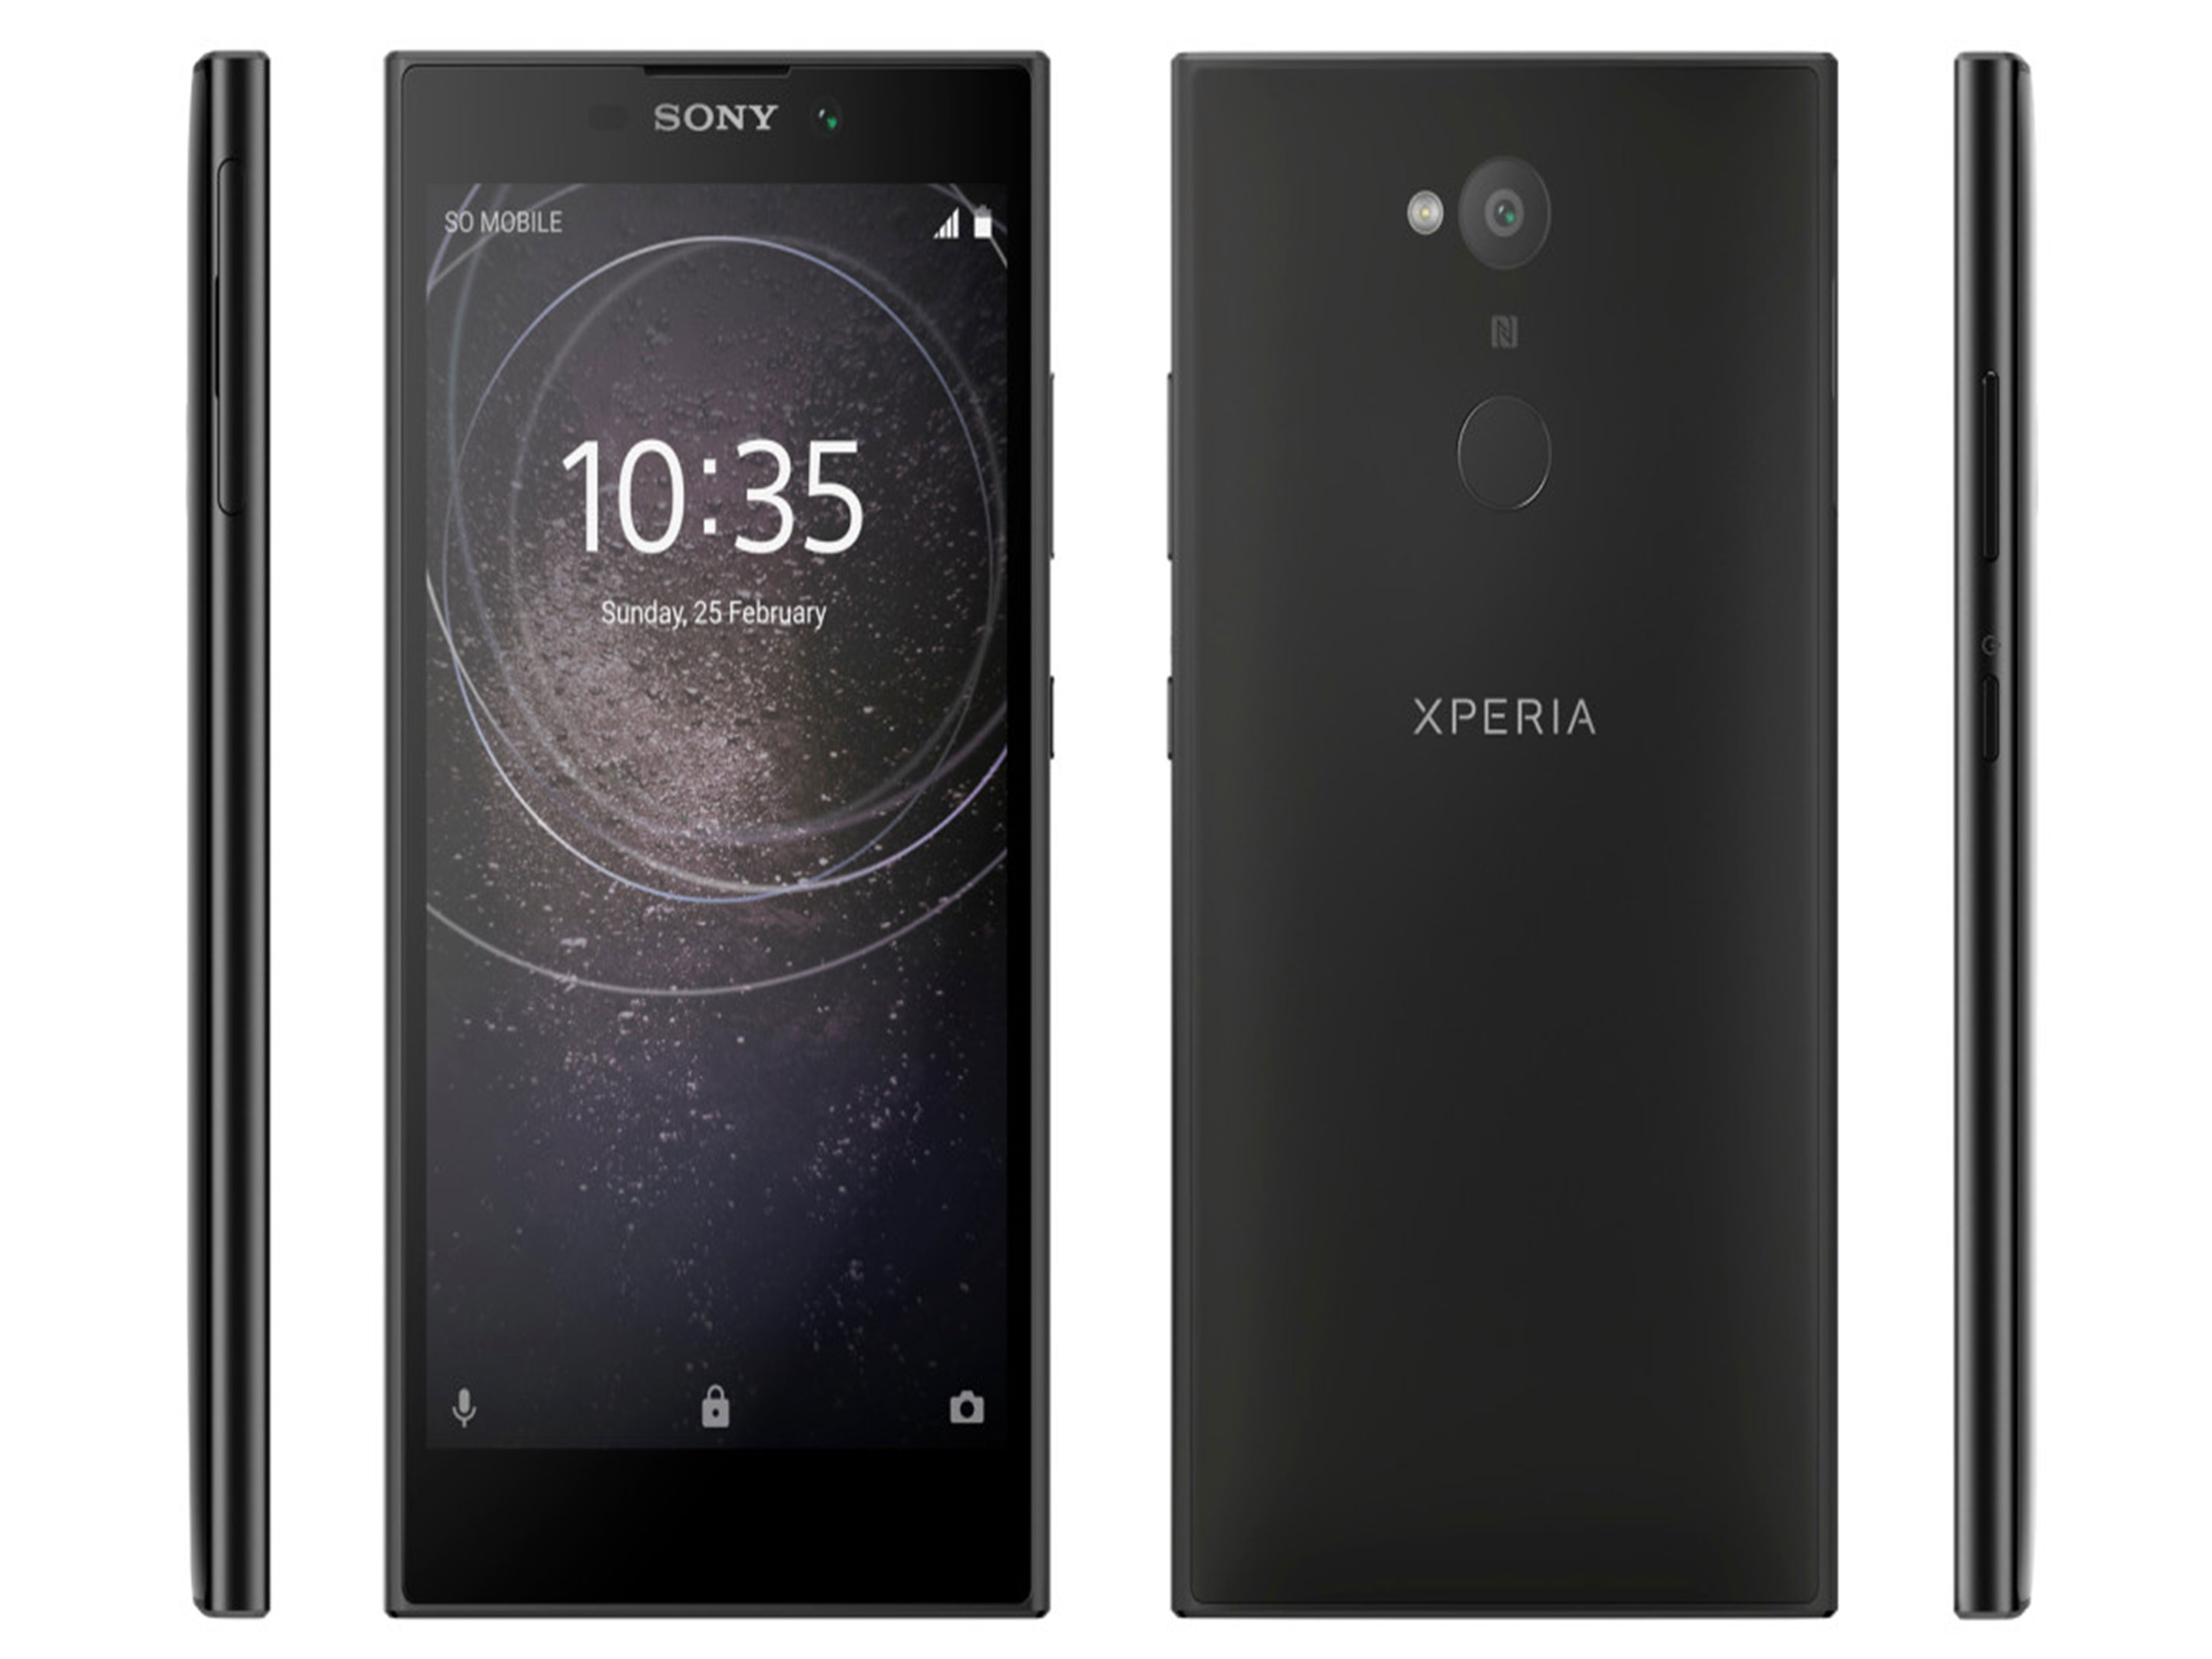 Official render of Sony Xperia L2